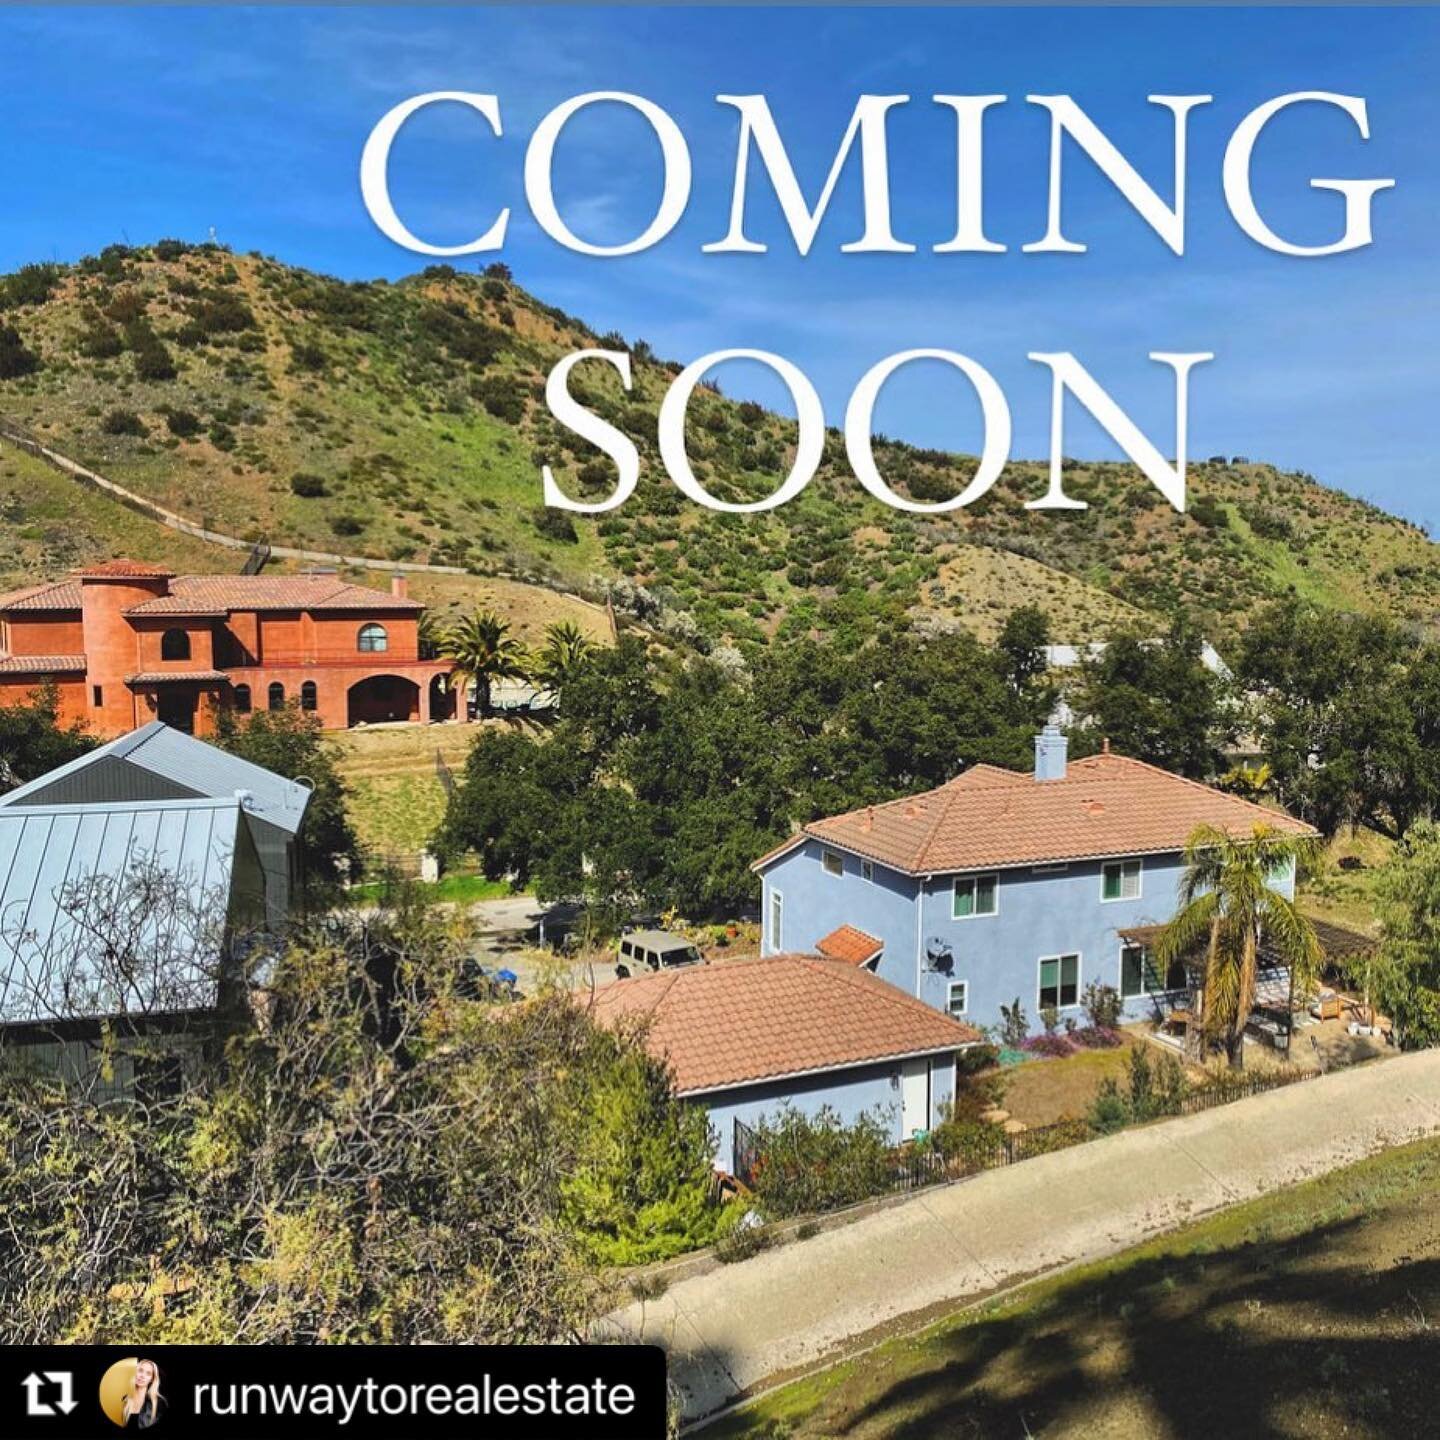 #Repost @runwaytorealestate
・・・
NEW LISTING 🏄&zwj;♀️ 

In the heart of Malibu Wine Country sits this newly reimagined Modern Ranch Home located close to Malibu beaches, hiking trails &amp; 101 freeway. Open floor plan with vaulted ceiling and abunda